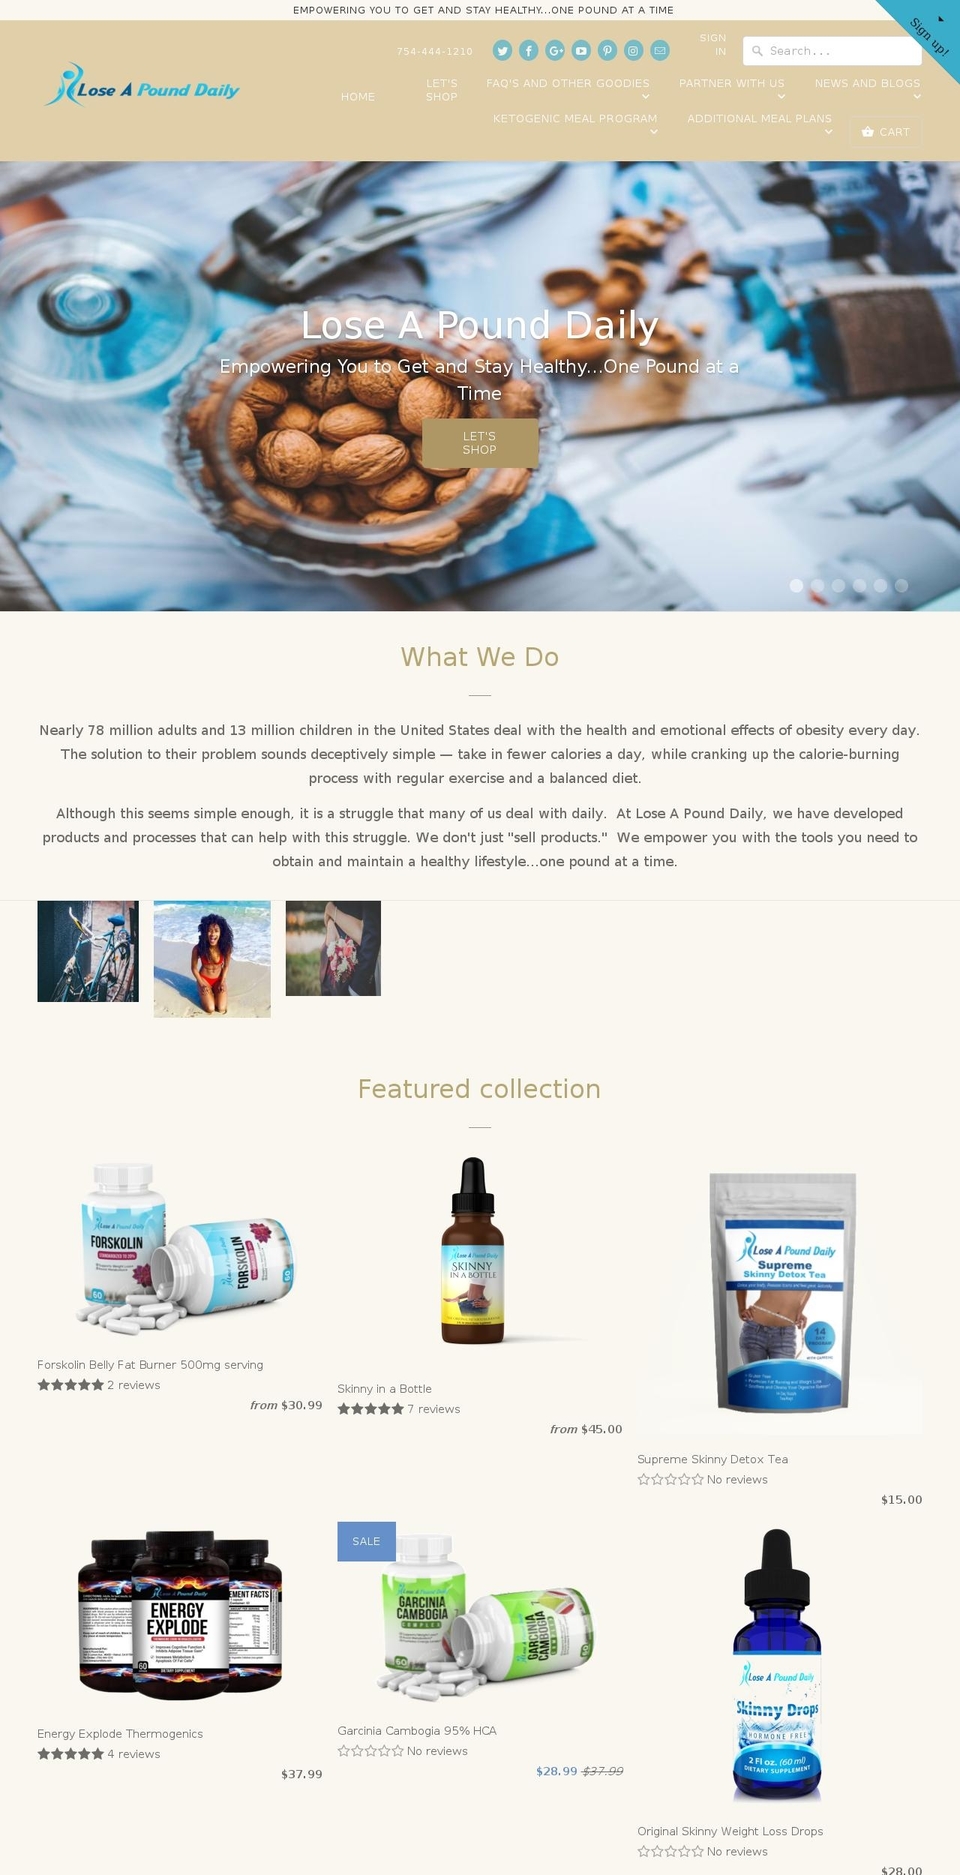 FASTOR Shopify theme site example loseapounddaily.com